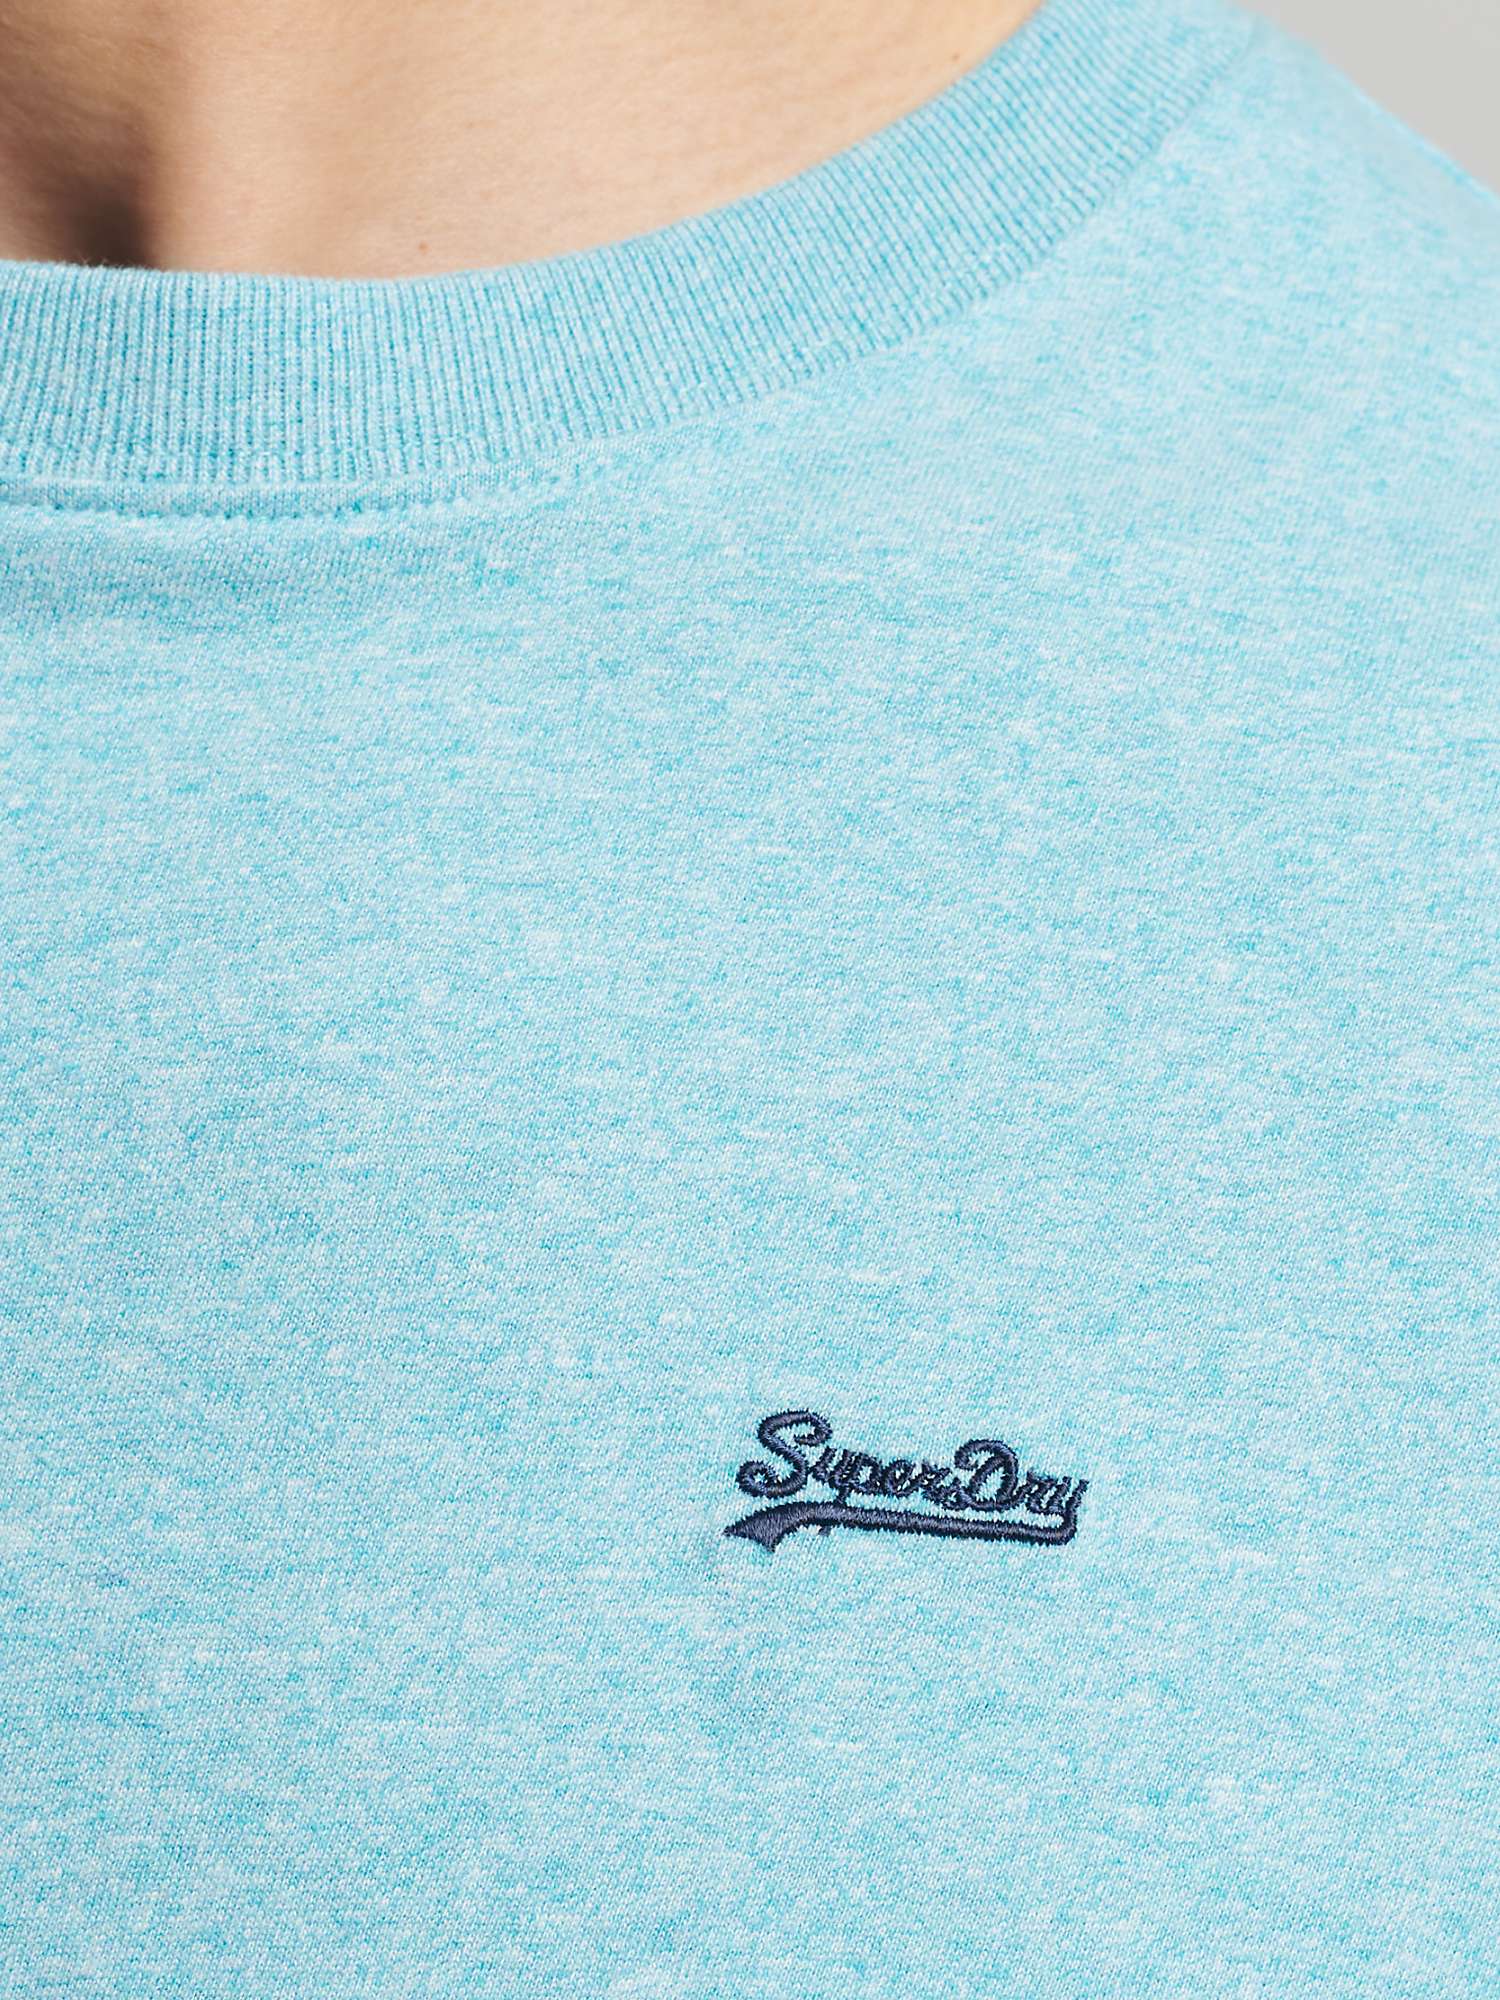 Buy Superdry Micro Embroidered Creek T-Shirt Online at johnlewis.com